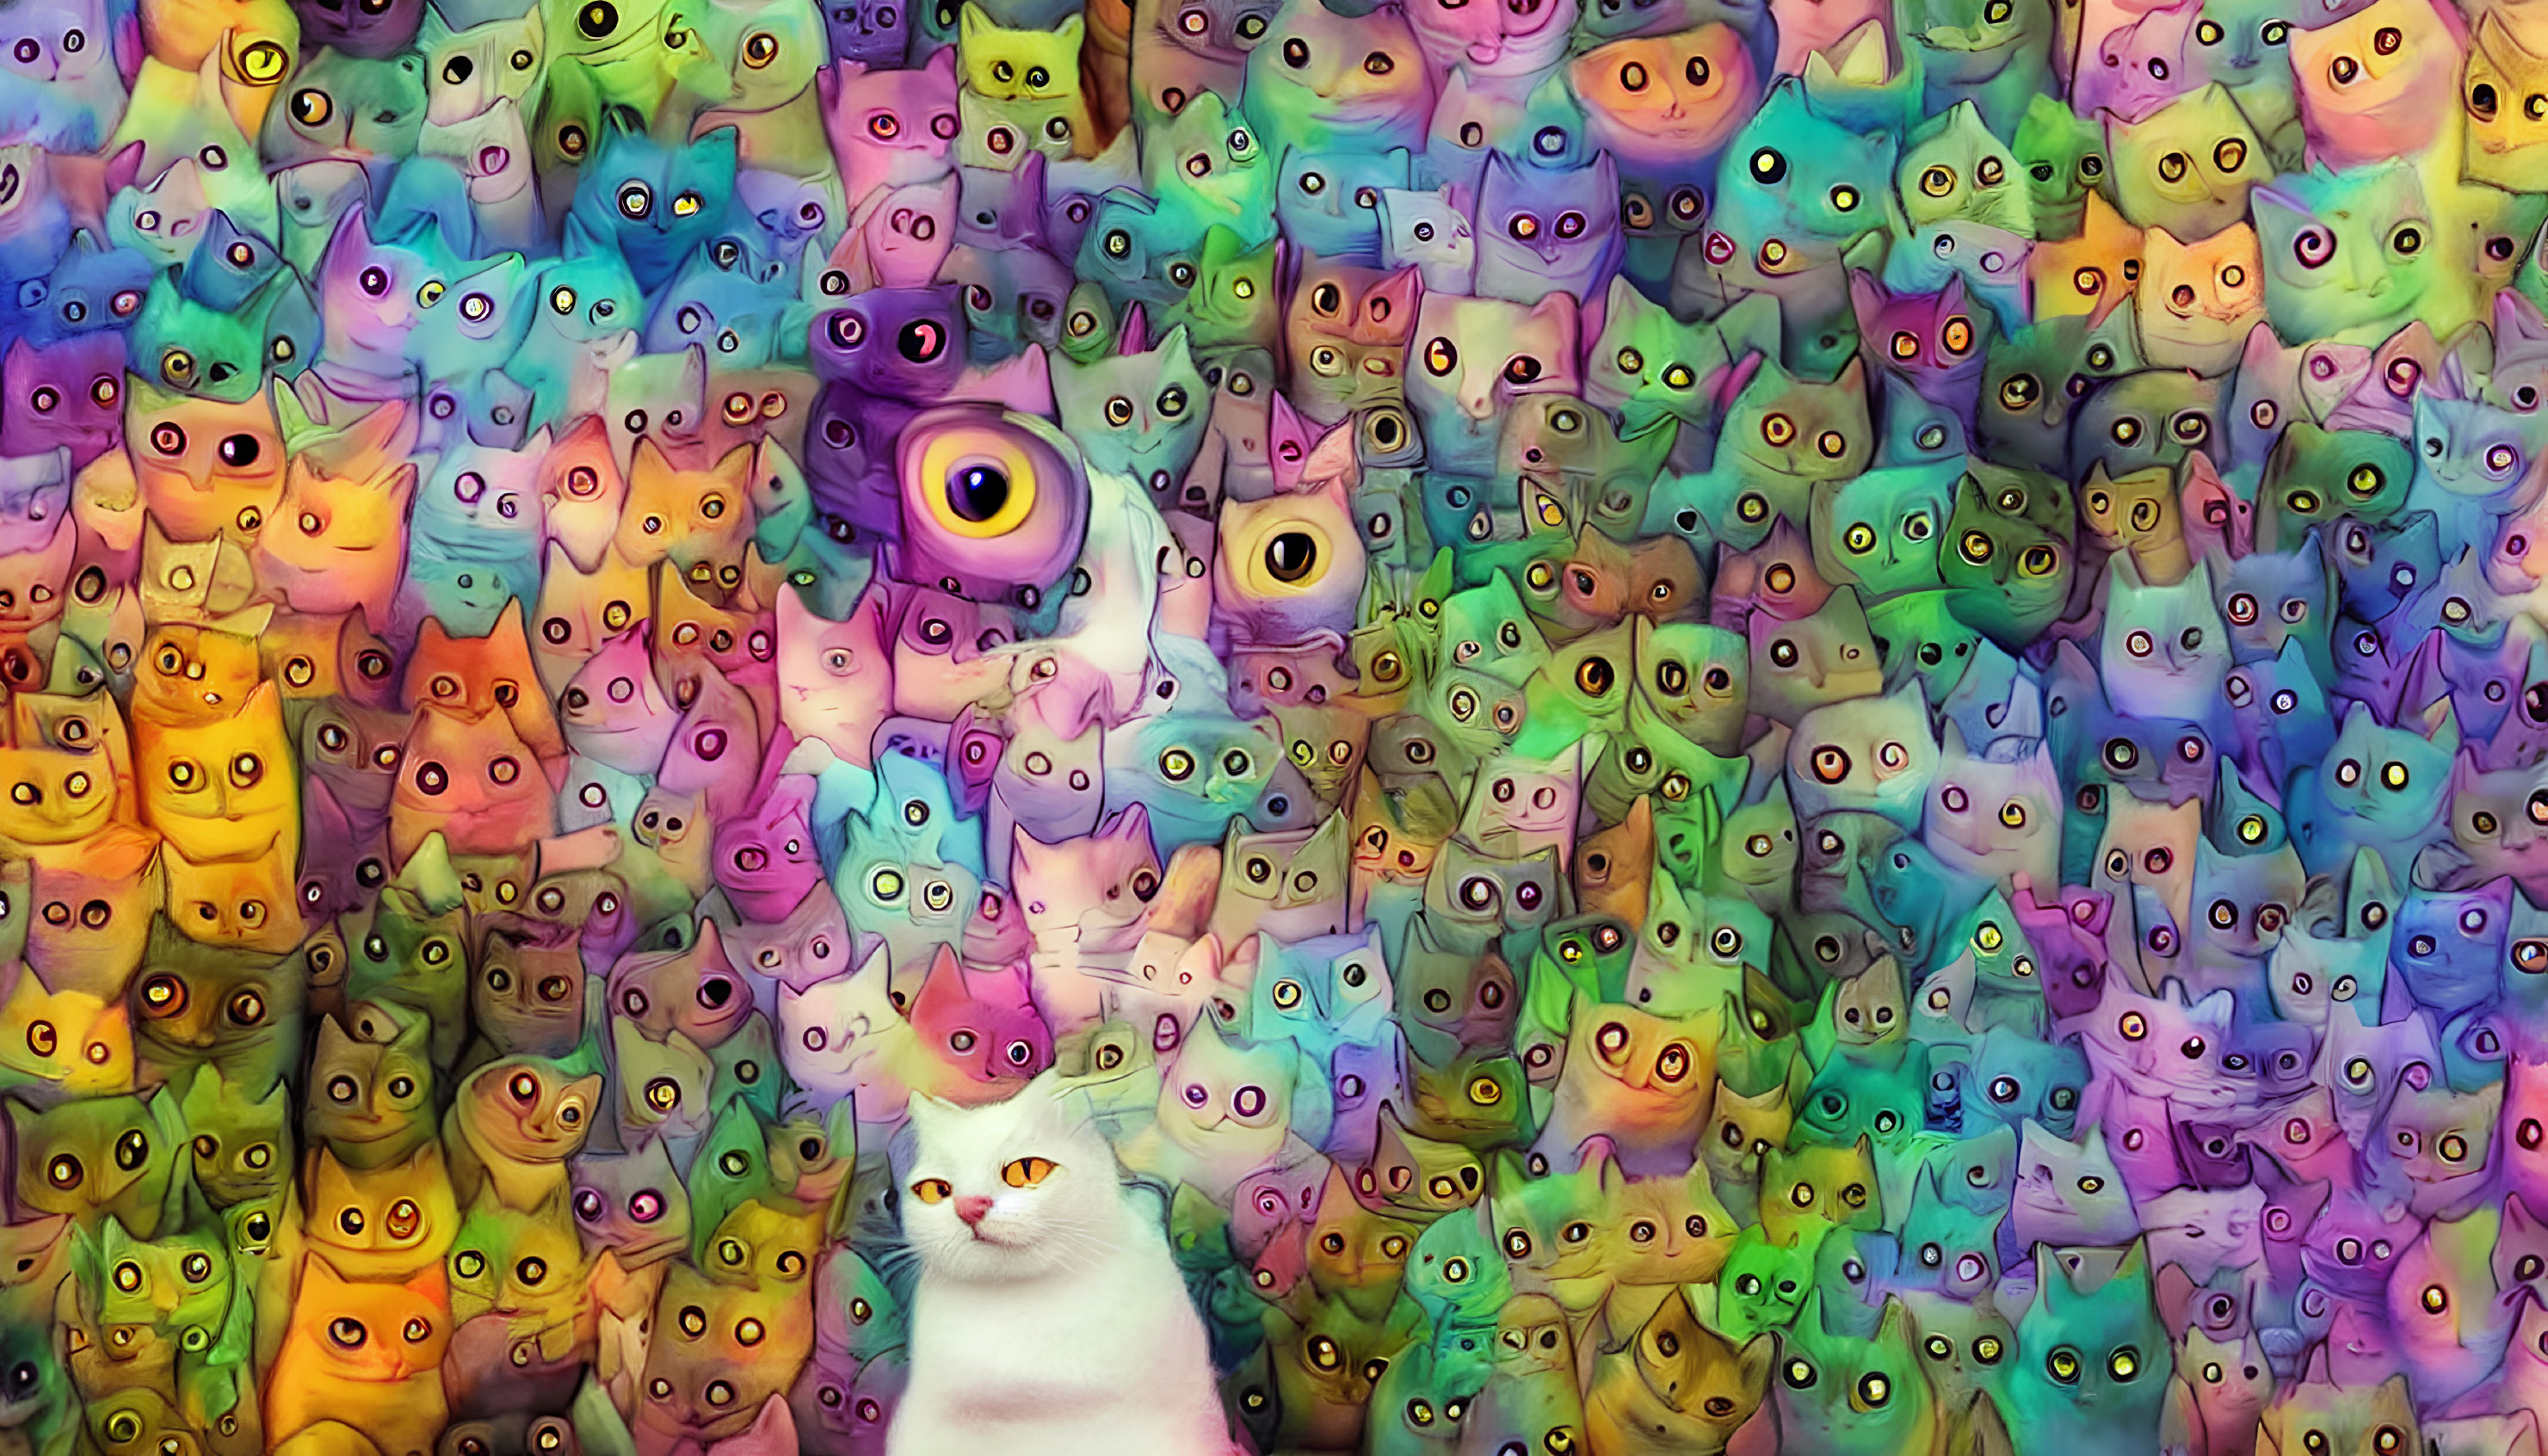 White Cat Surrounded by Whimsical Creatures on Colorful Background